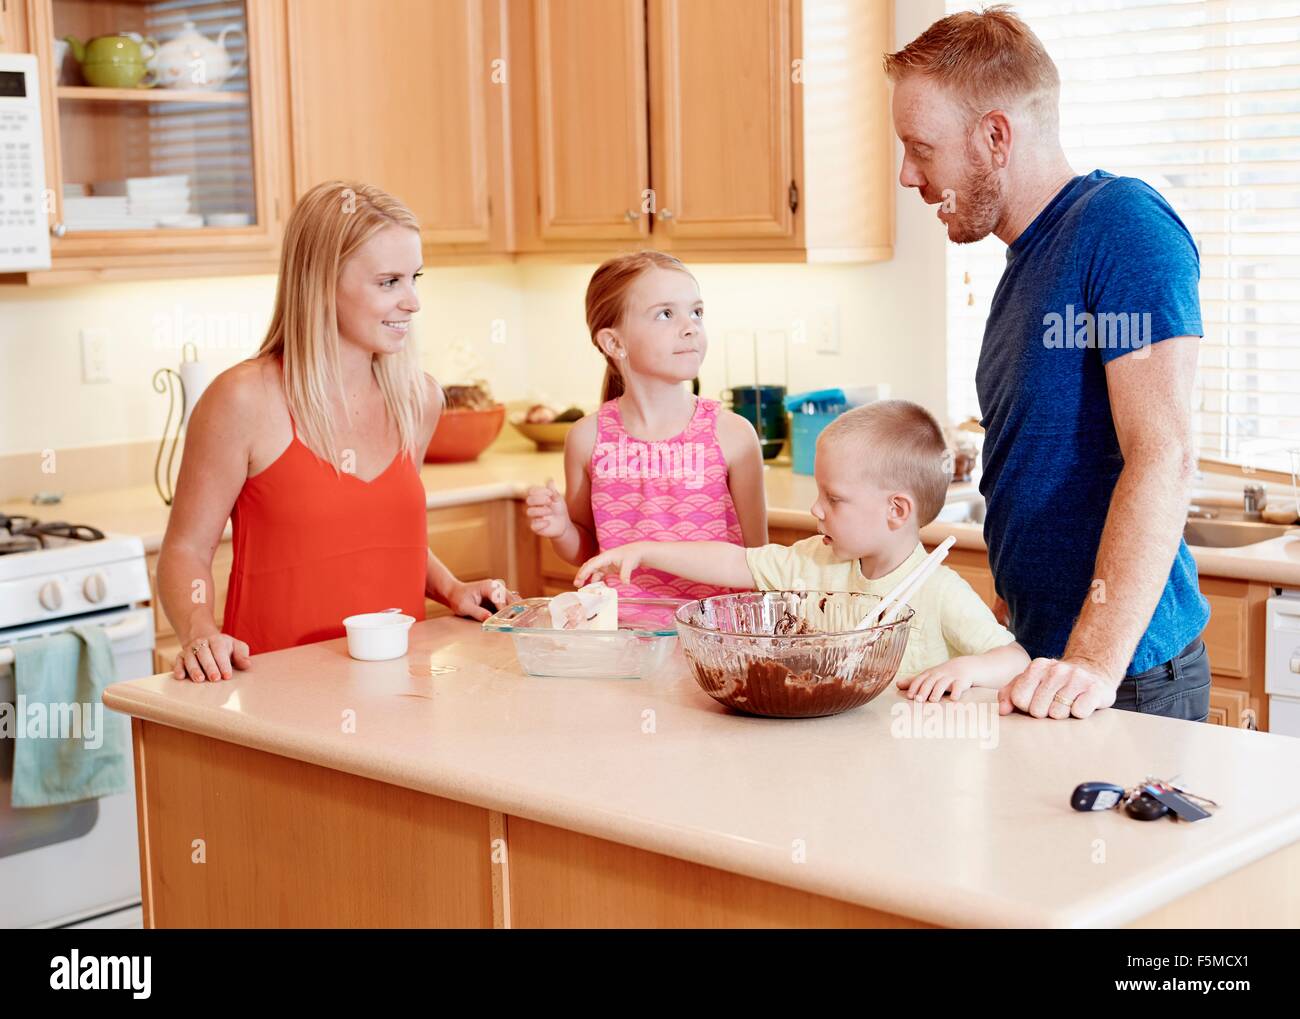 Family baking in kitchen Banque D'Images